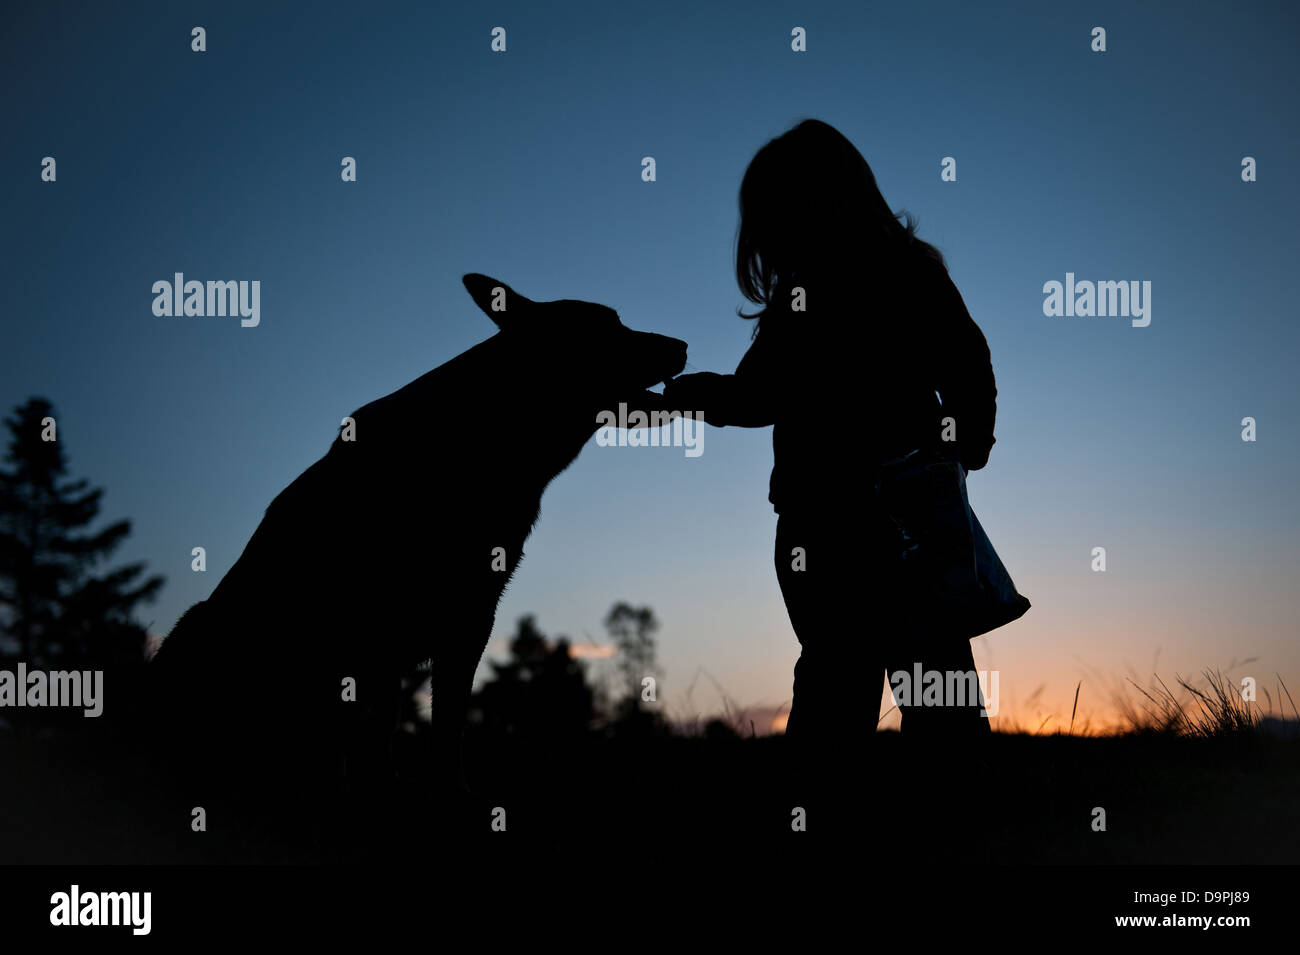 Sunset silhouette of young toddler girl with long hair feeding her dog who's sitting down. Breed is an Australian Cattle dog. Stock Photo